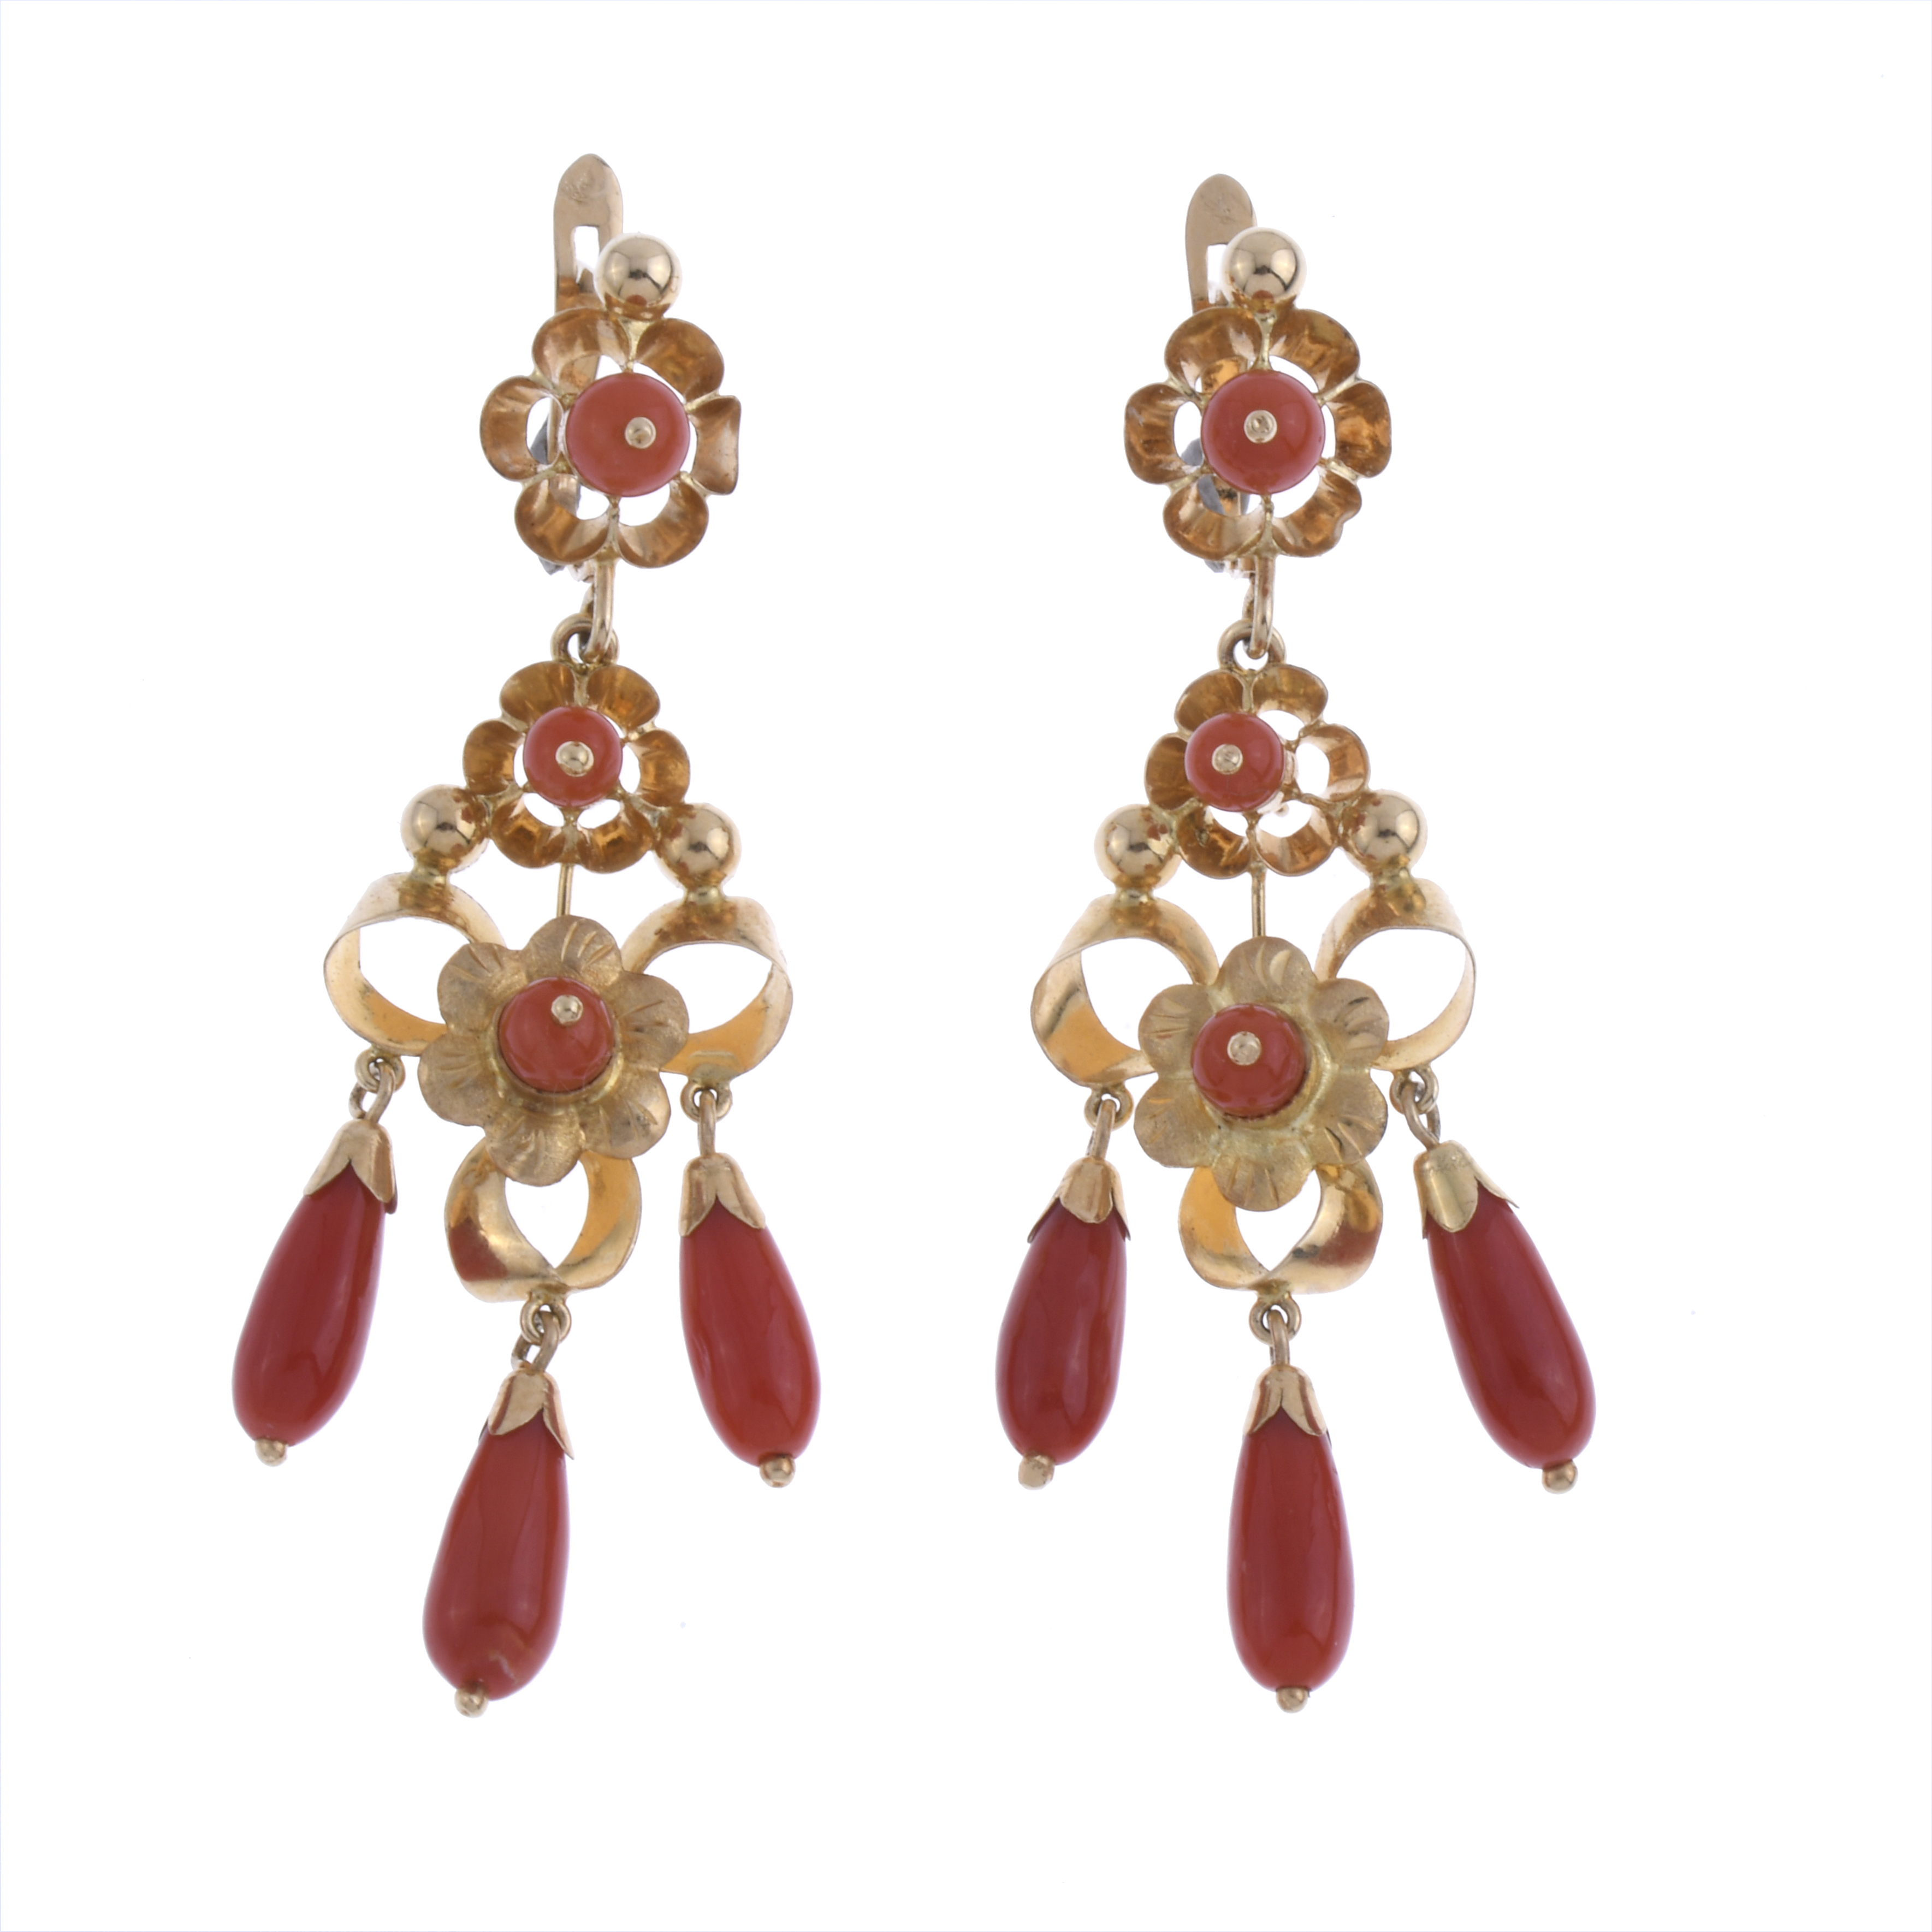 ELIZABETHAN STYLE LONG EARRINGS, WITH CORAL.